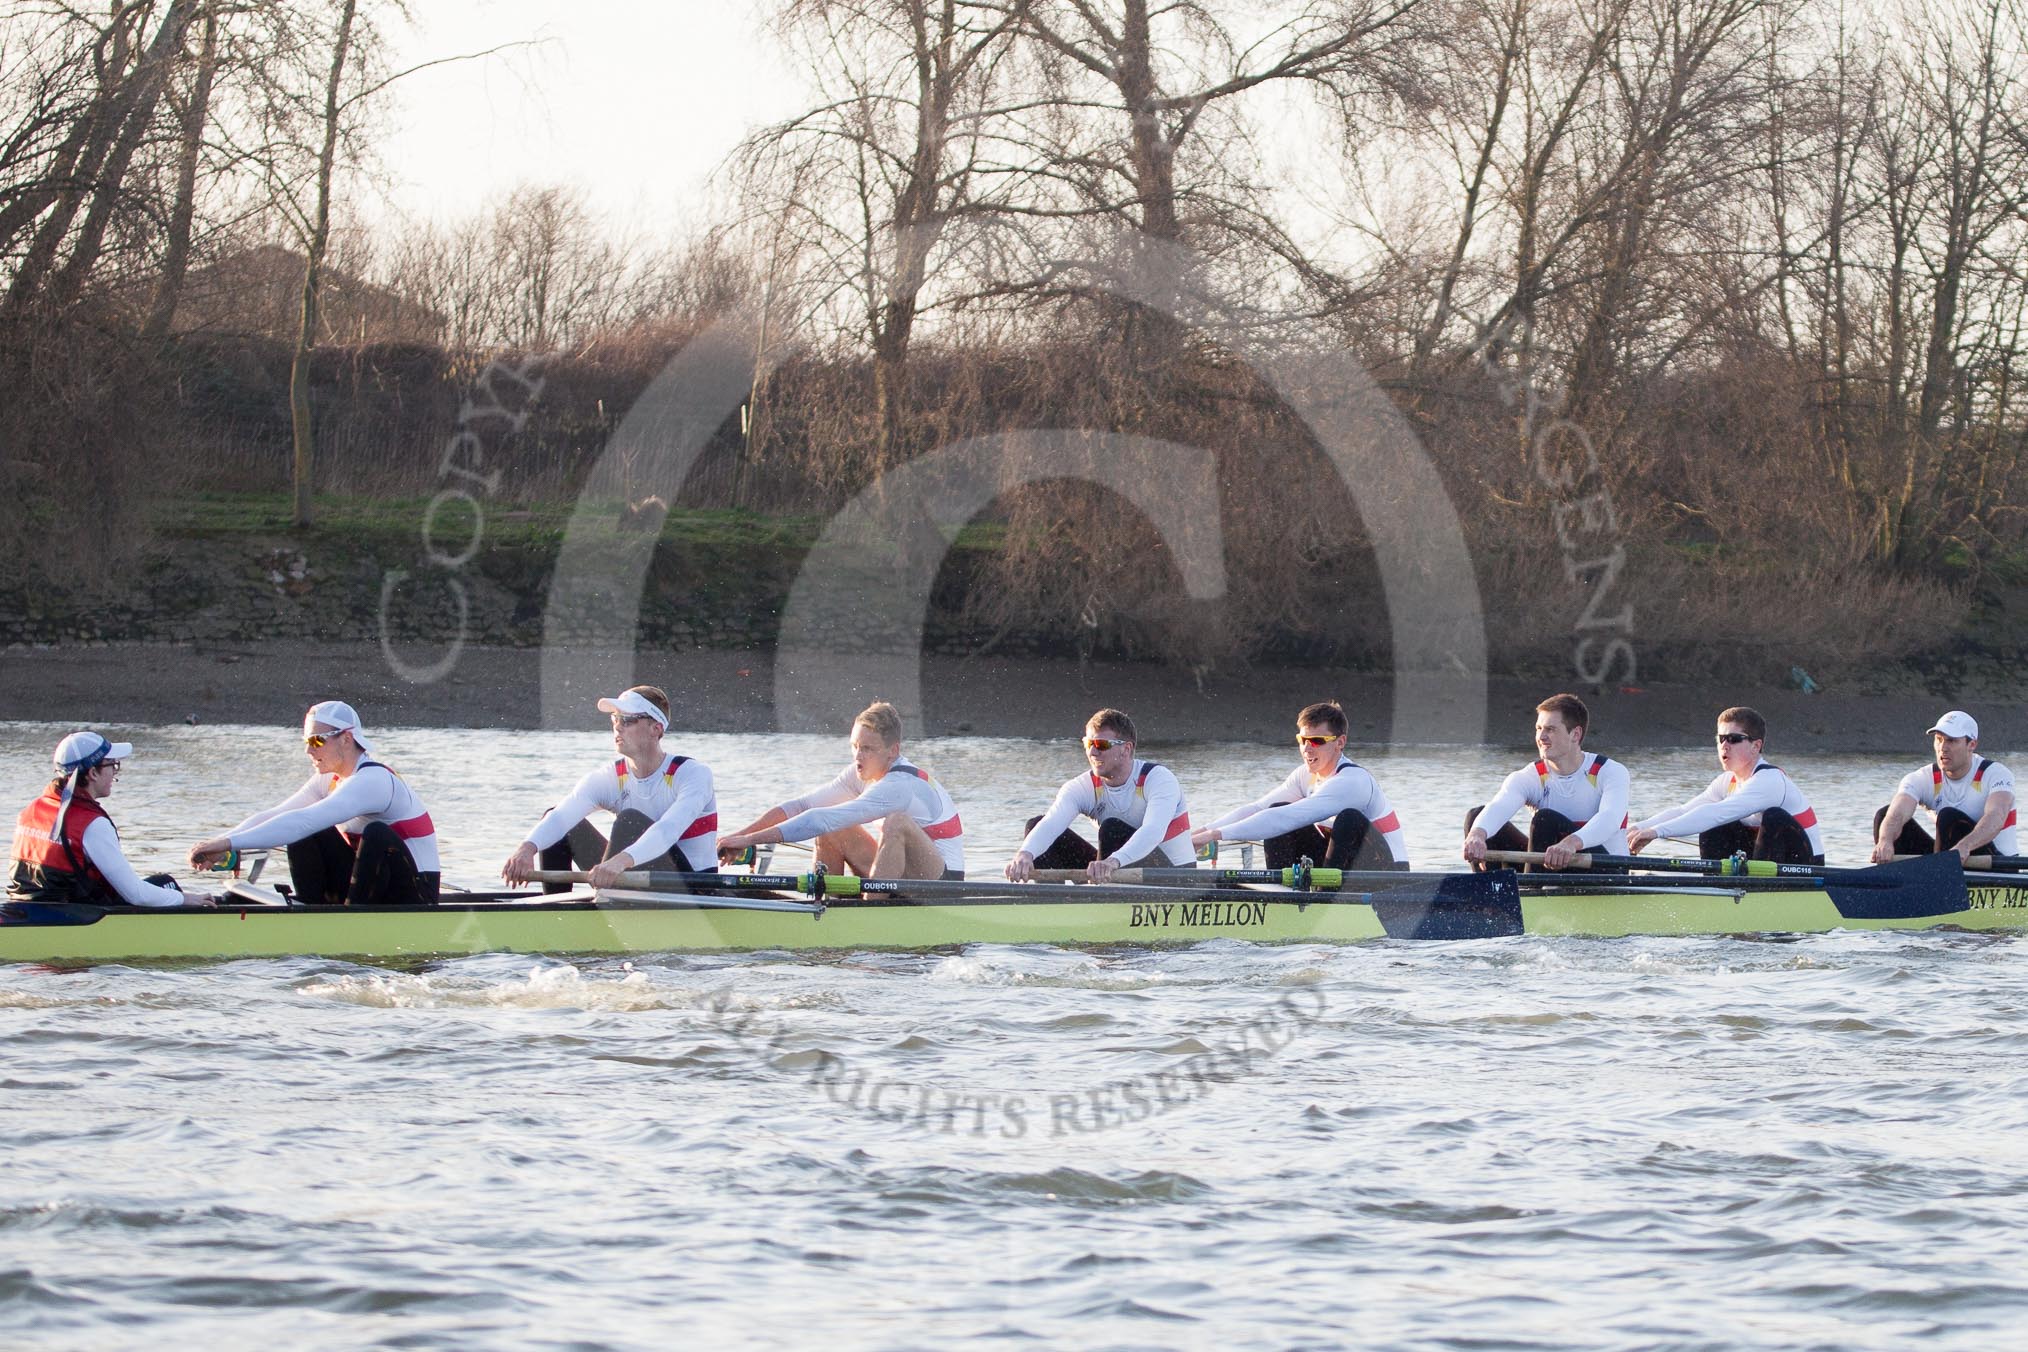 The Boat Race season 2014 - fixture OUBC vs German U23: The German U23-boat approaching the Mile Post..
River Thames between Putney Bridge and Chiswick Bridge,



on 08 March 2014 at 16:49, image #94